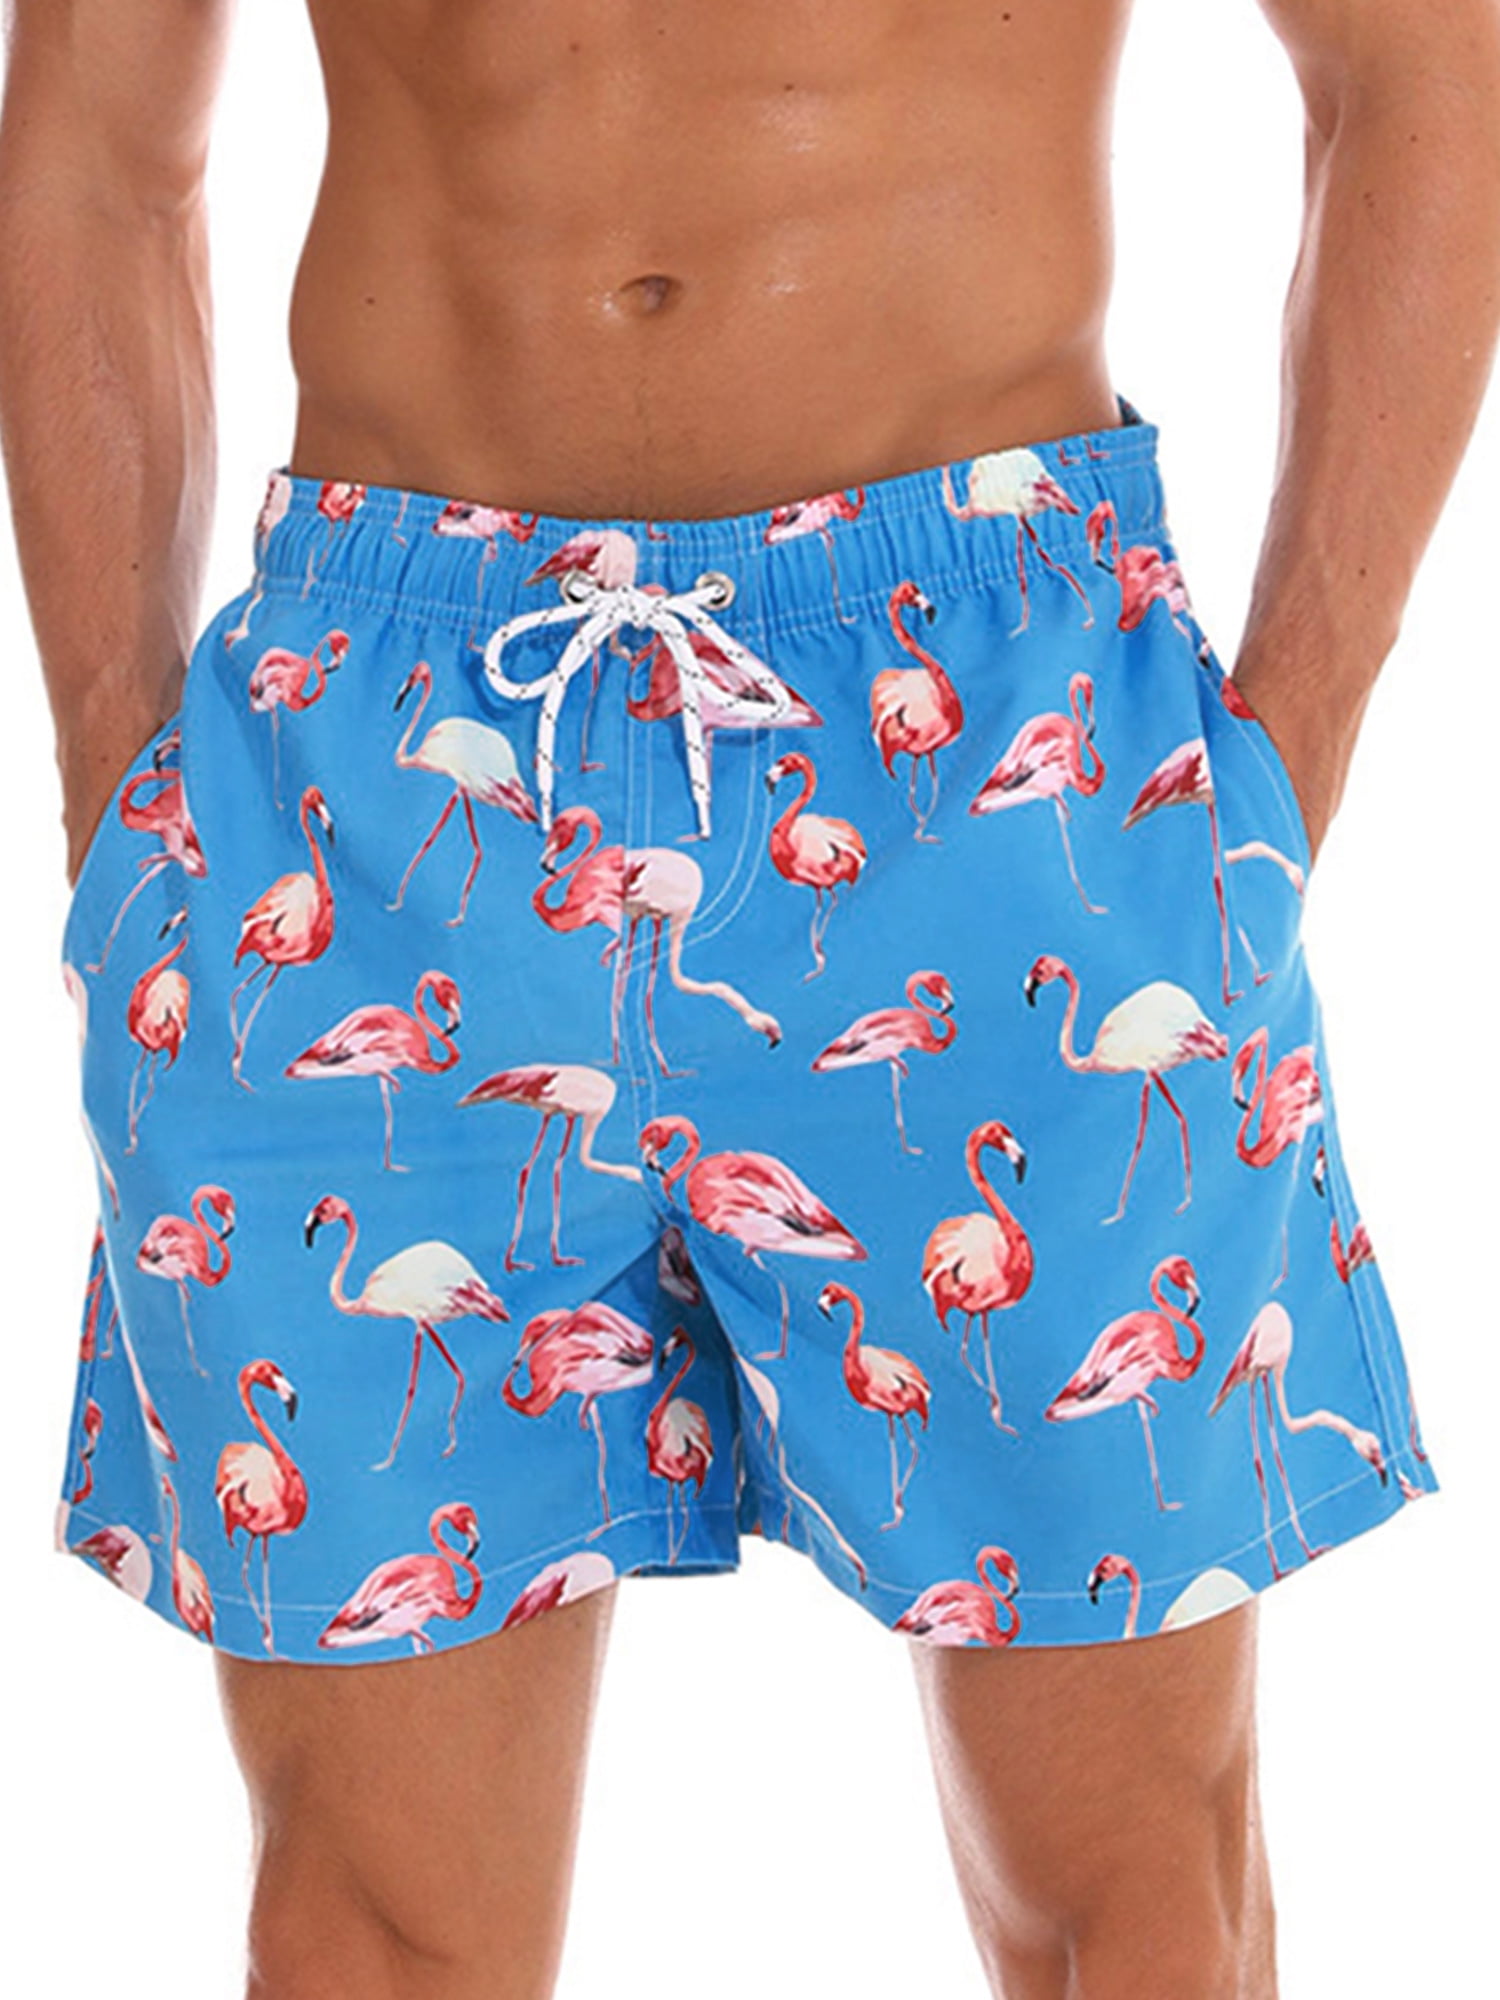 Sea Turtle Mens Swim Trunks 3D Printed Beach Board Shorts with Pockets Novelty Bathing Suits for Teen Boys 